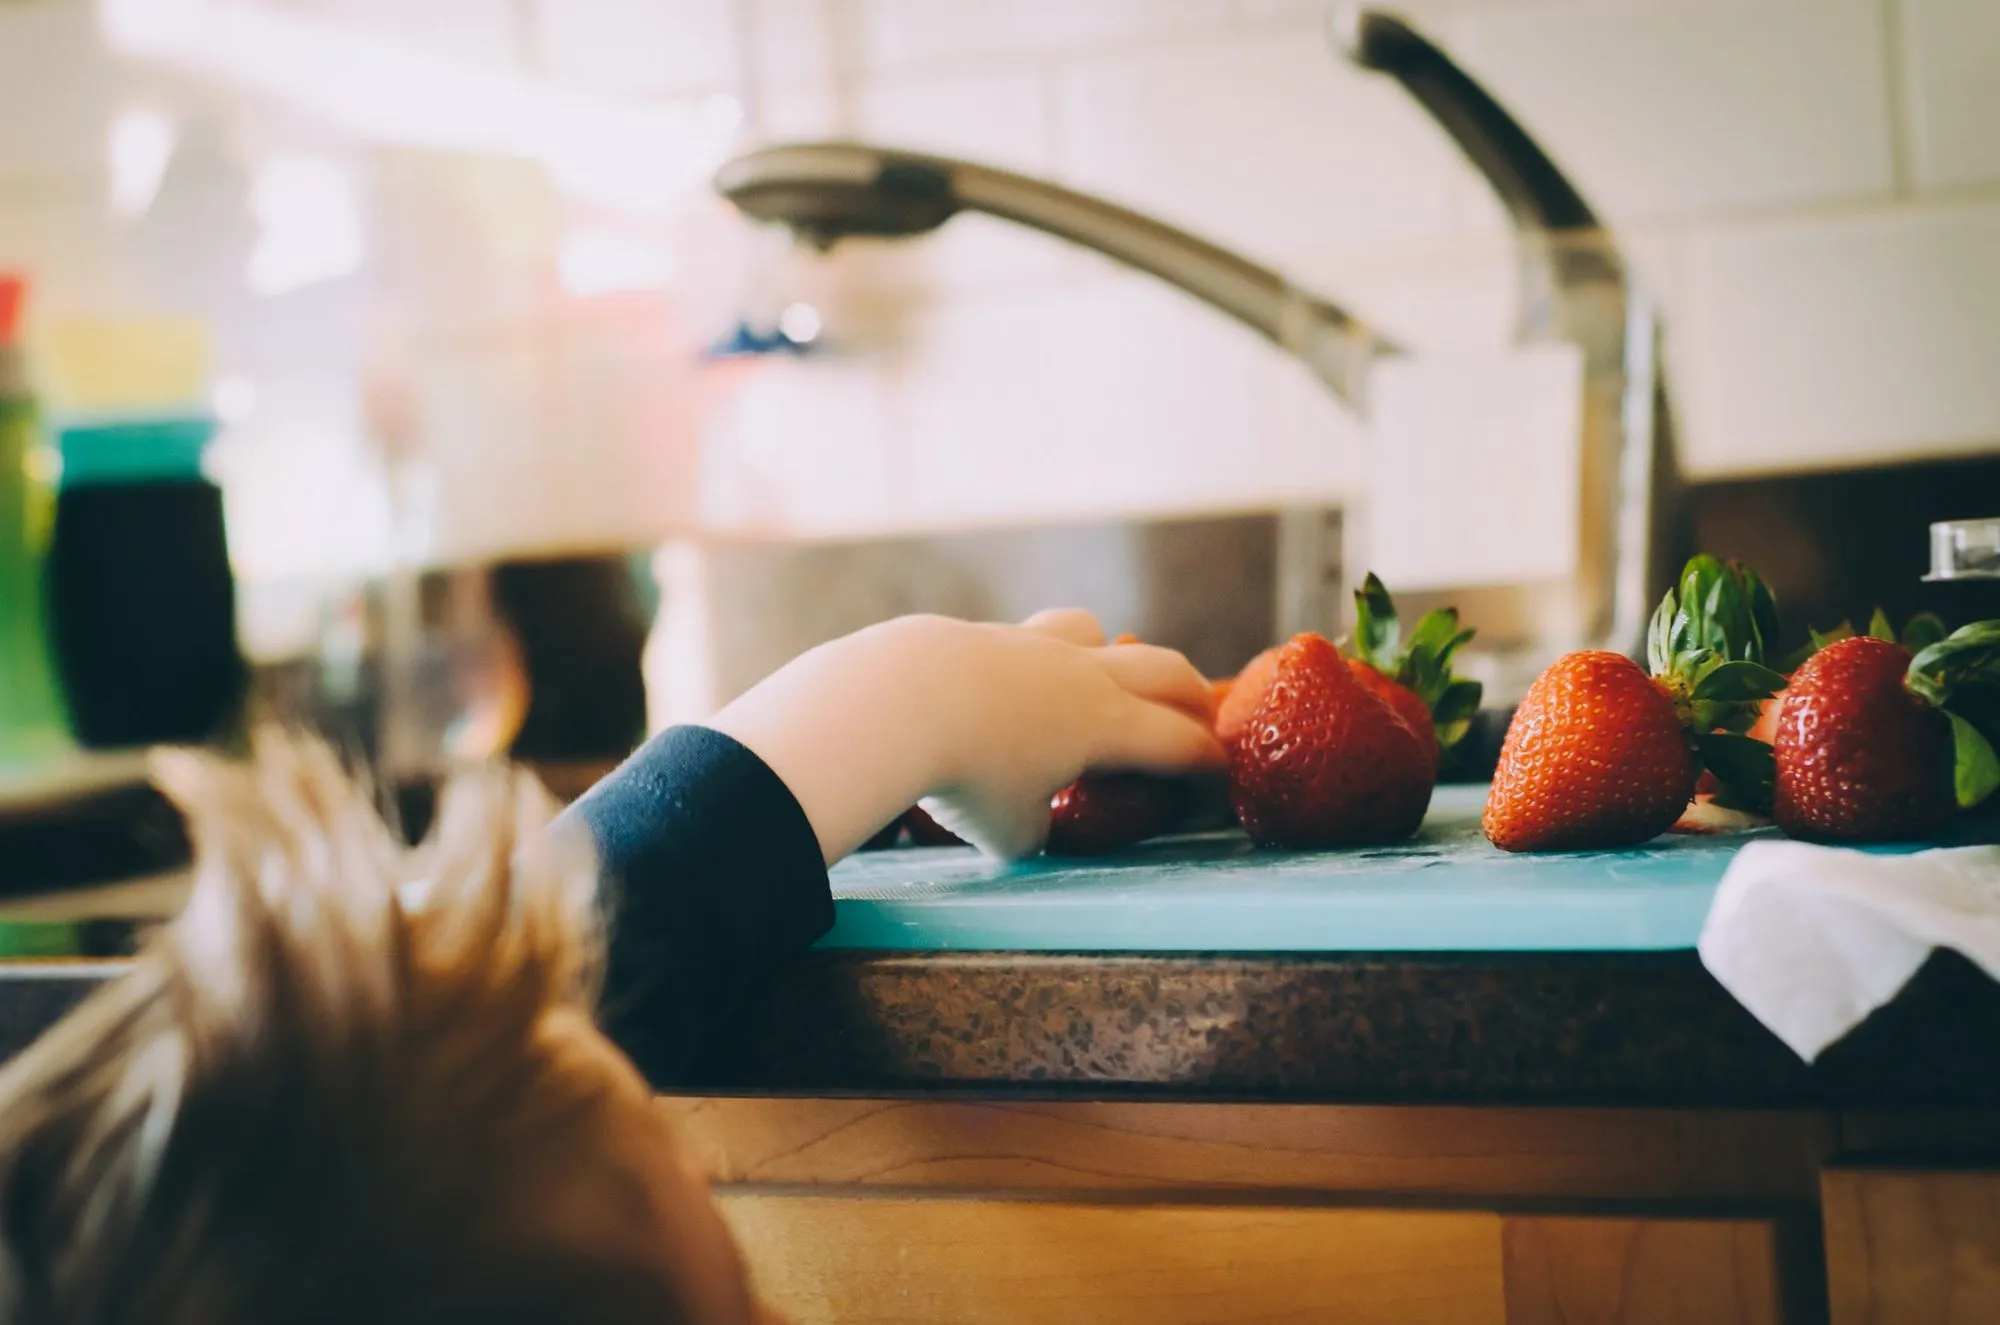 child's hand grabbing a strawberry from the kitchen counter